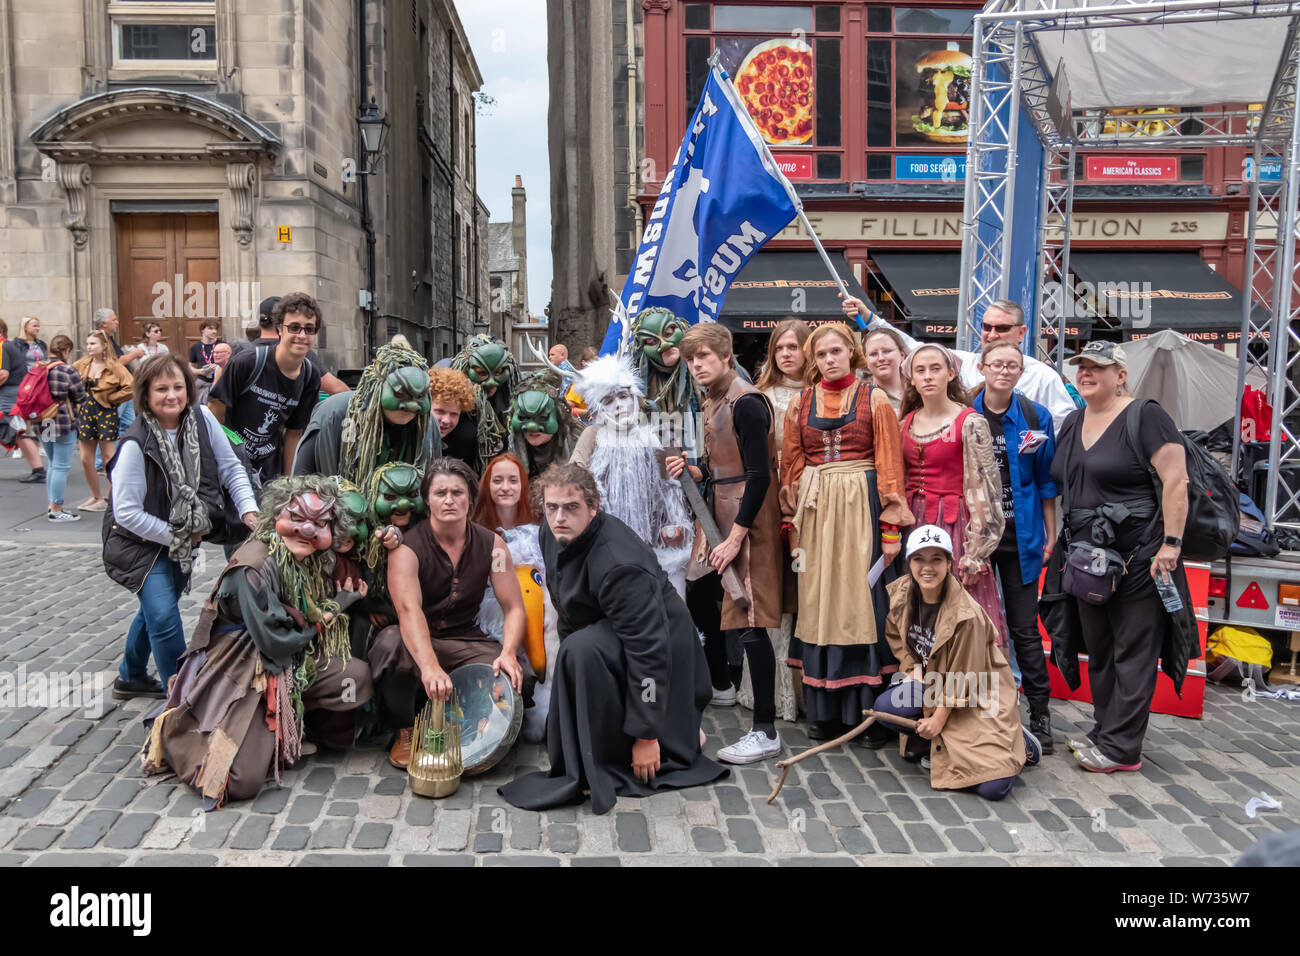 Edinburgh, Scotland, UK. 4th August, 2019. Performers on the Royal Mile promoting the Friendswood High School, Texas presentation of Peer Gynt by Henrik Ibsen on at Central Hall venue 295 during the Edinburgh Fringe Festival. Credit: Skully/Alamy Live News Stock Photo